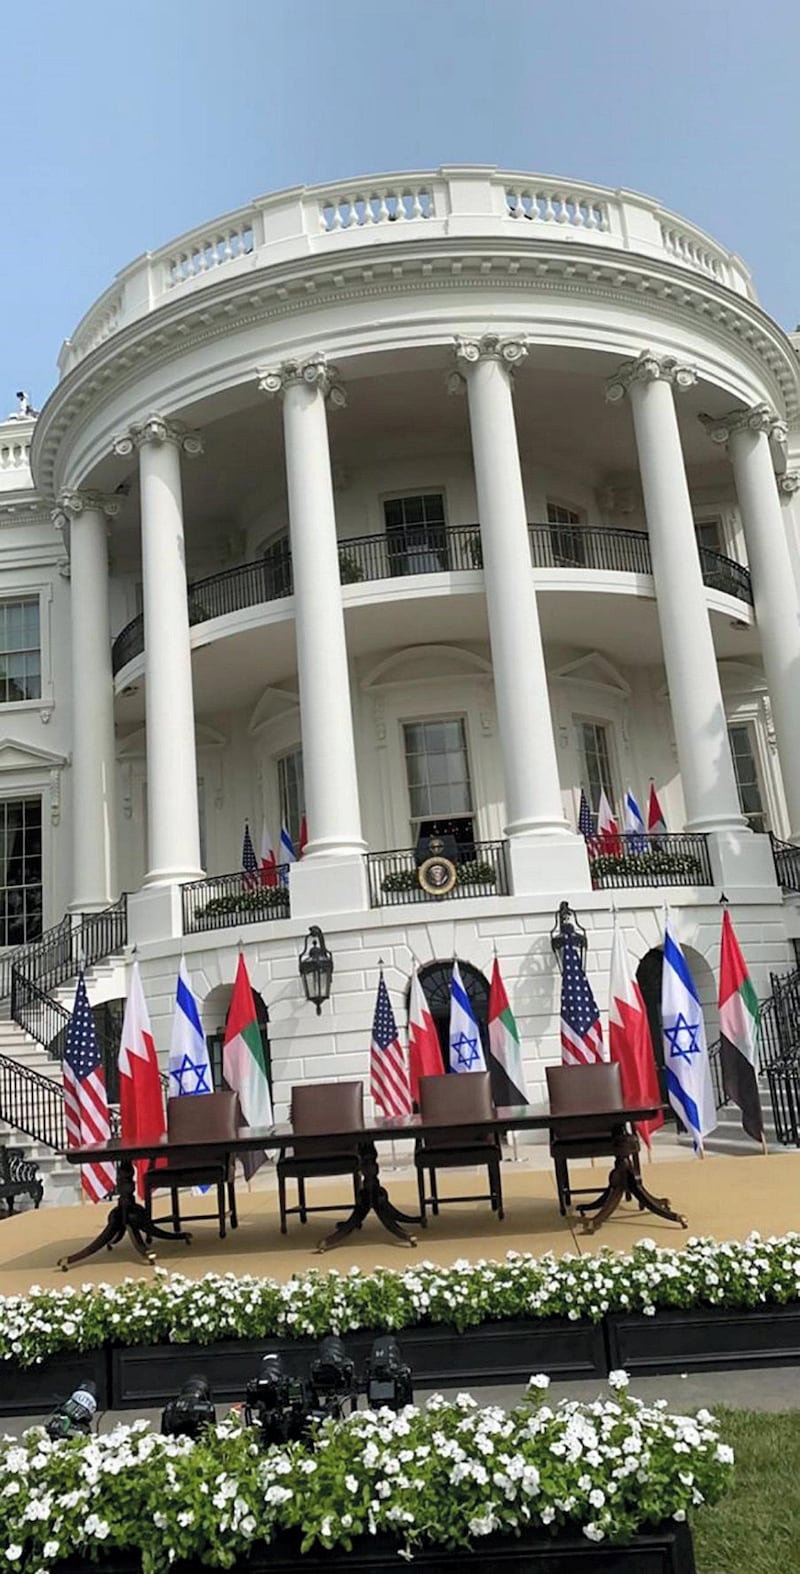 Preparations under way at the White House for the signing of the Abraham Accord.